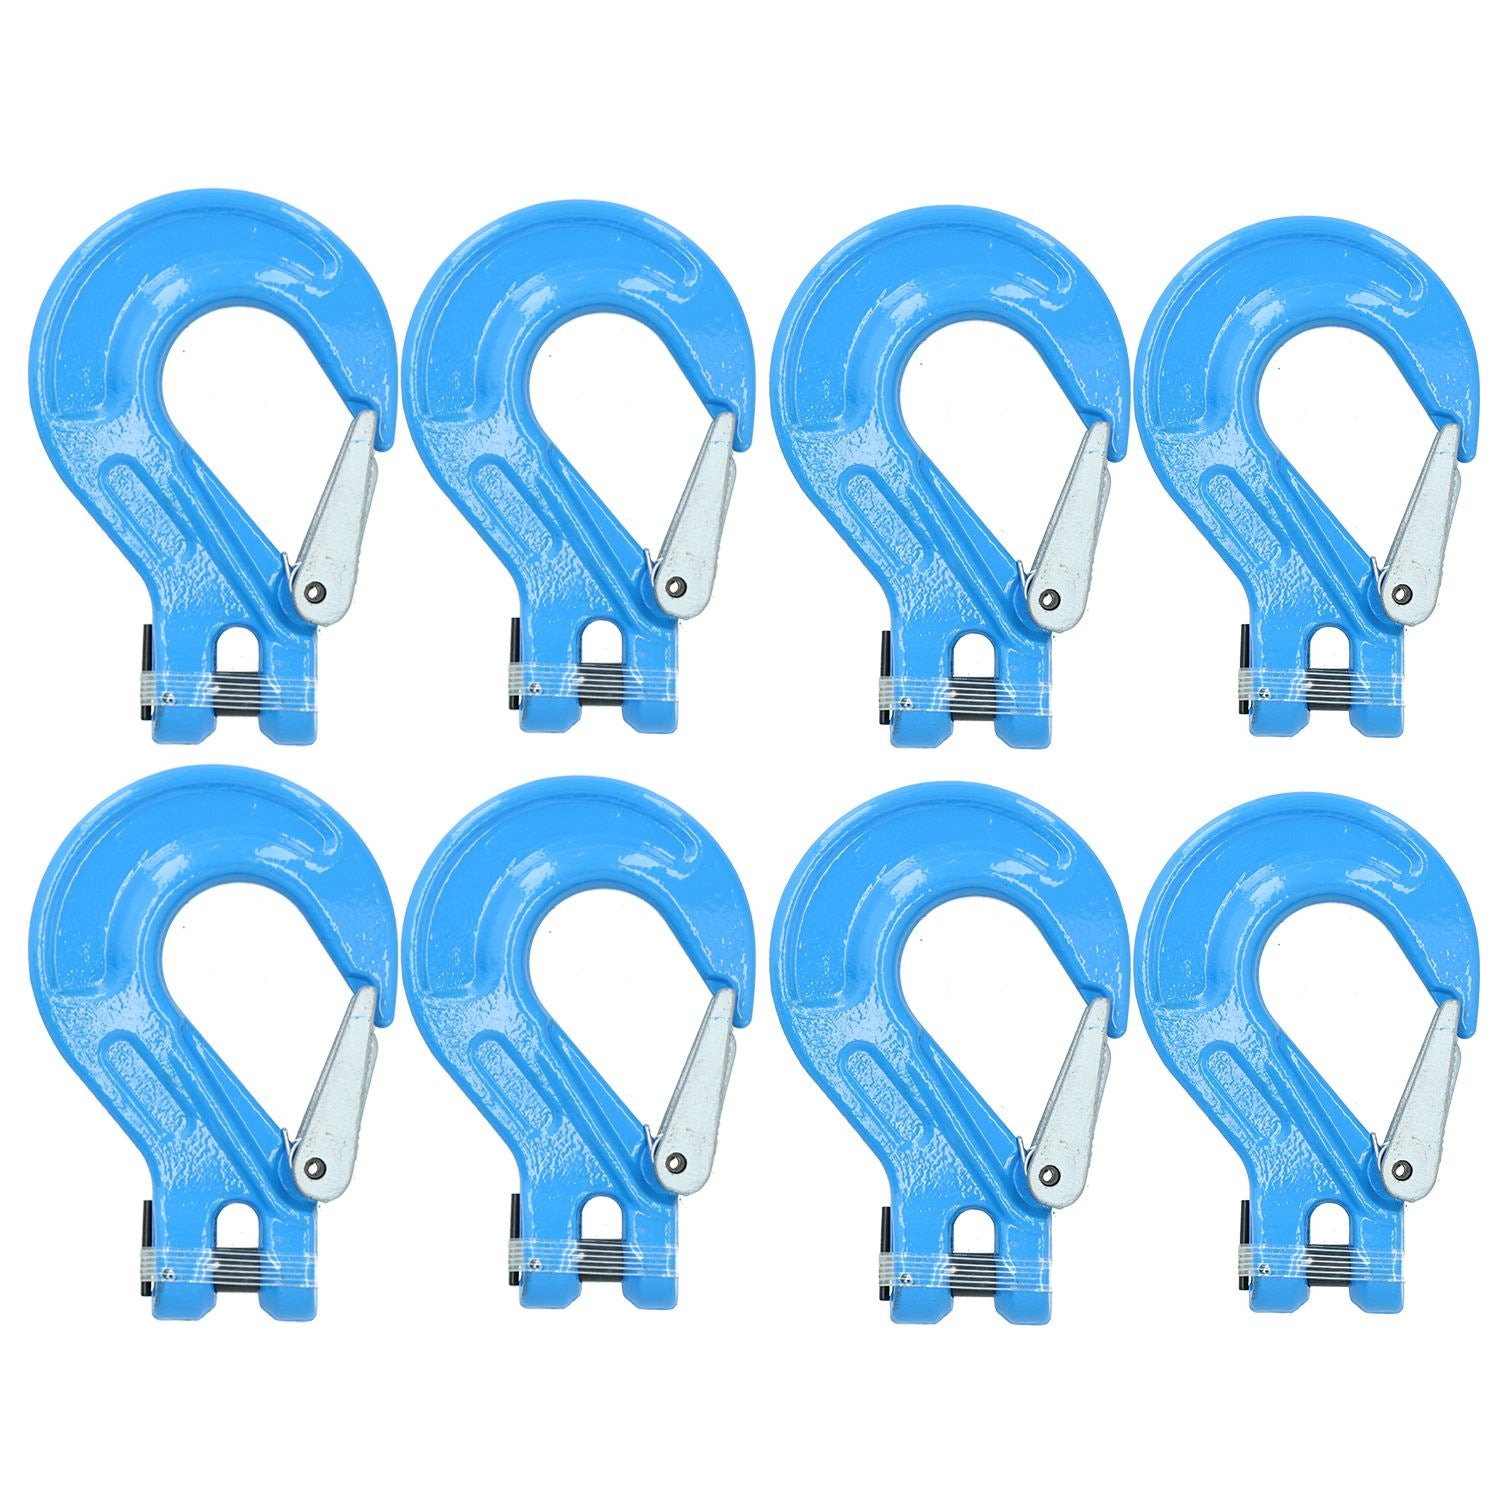 Clevis Sling Hook Safety Catch Max Lifting Capacity 3.15 Ton 10mm Chain 8pc